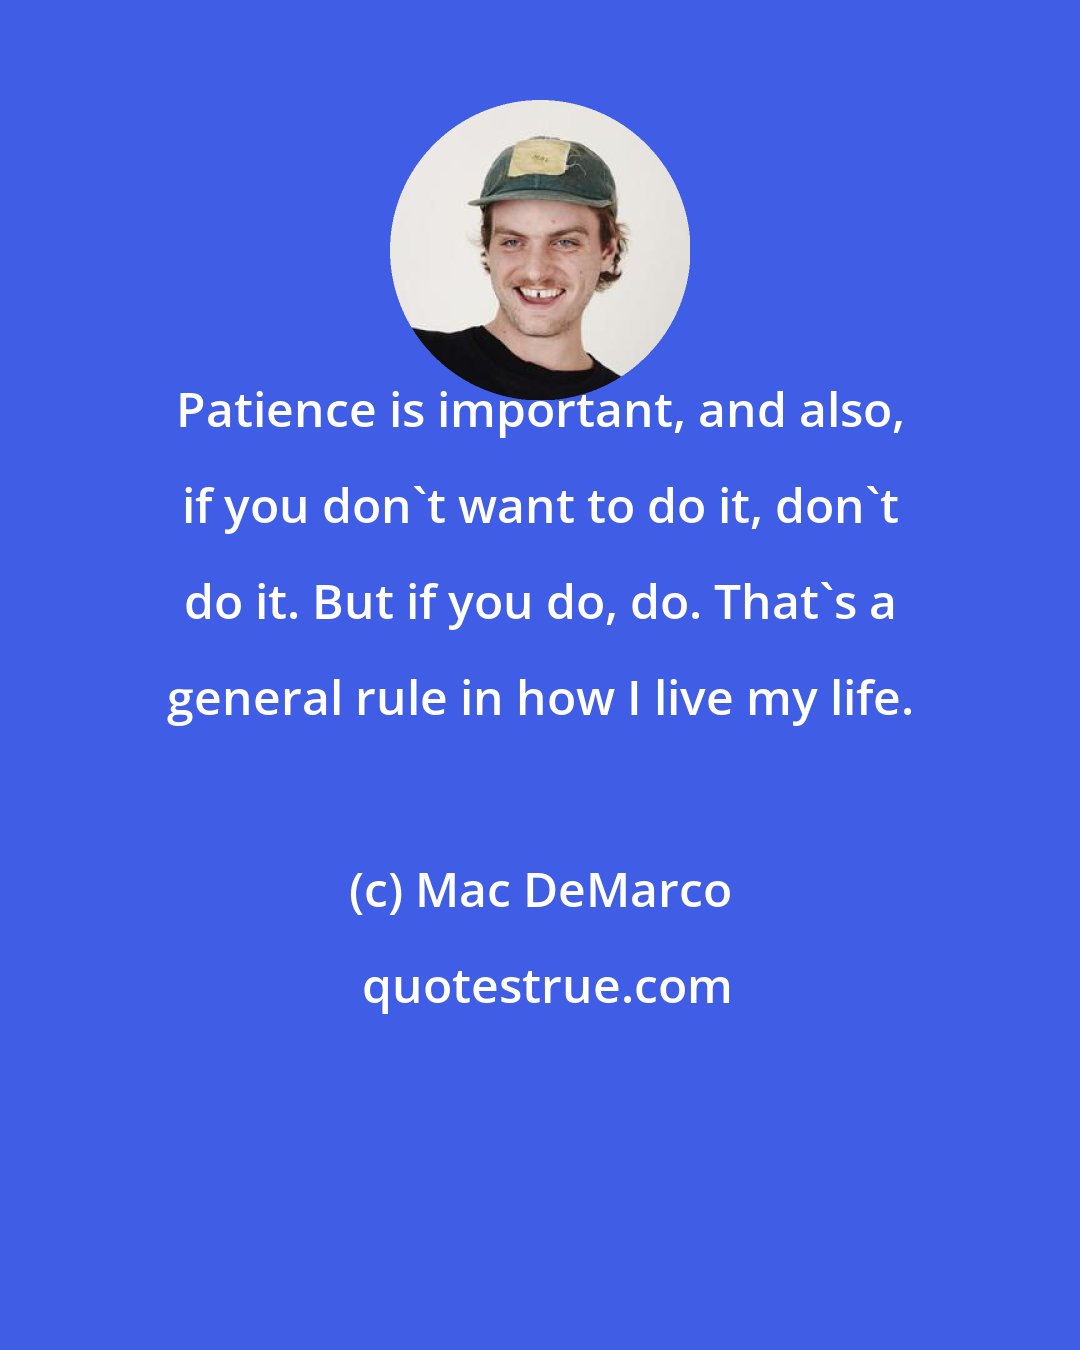 Mac DeMarco: Patience is important, and also, if you don't want to do it, don't do it. But if you do, do. That's a general rule in how I live my life.